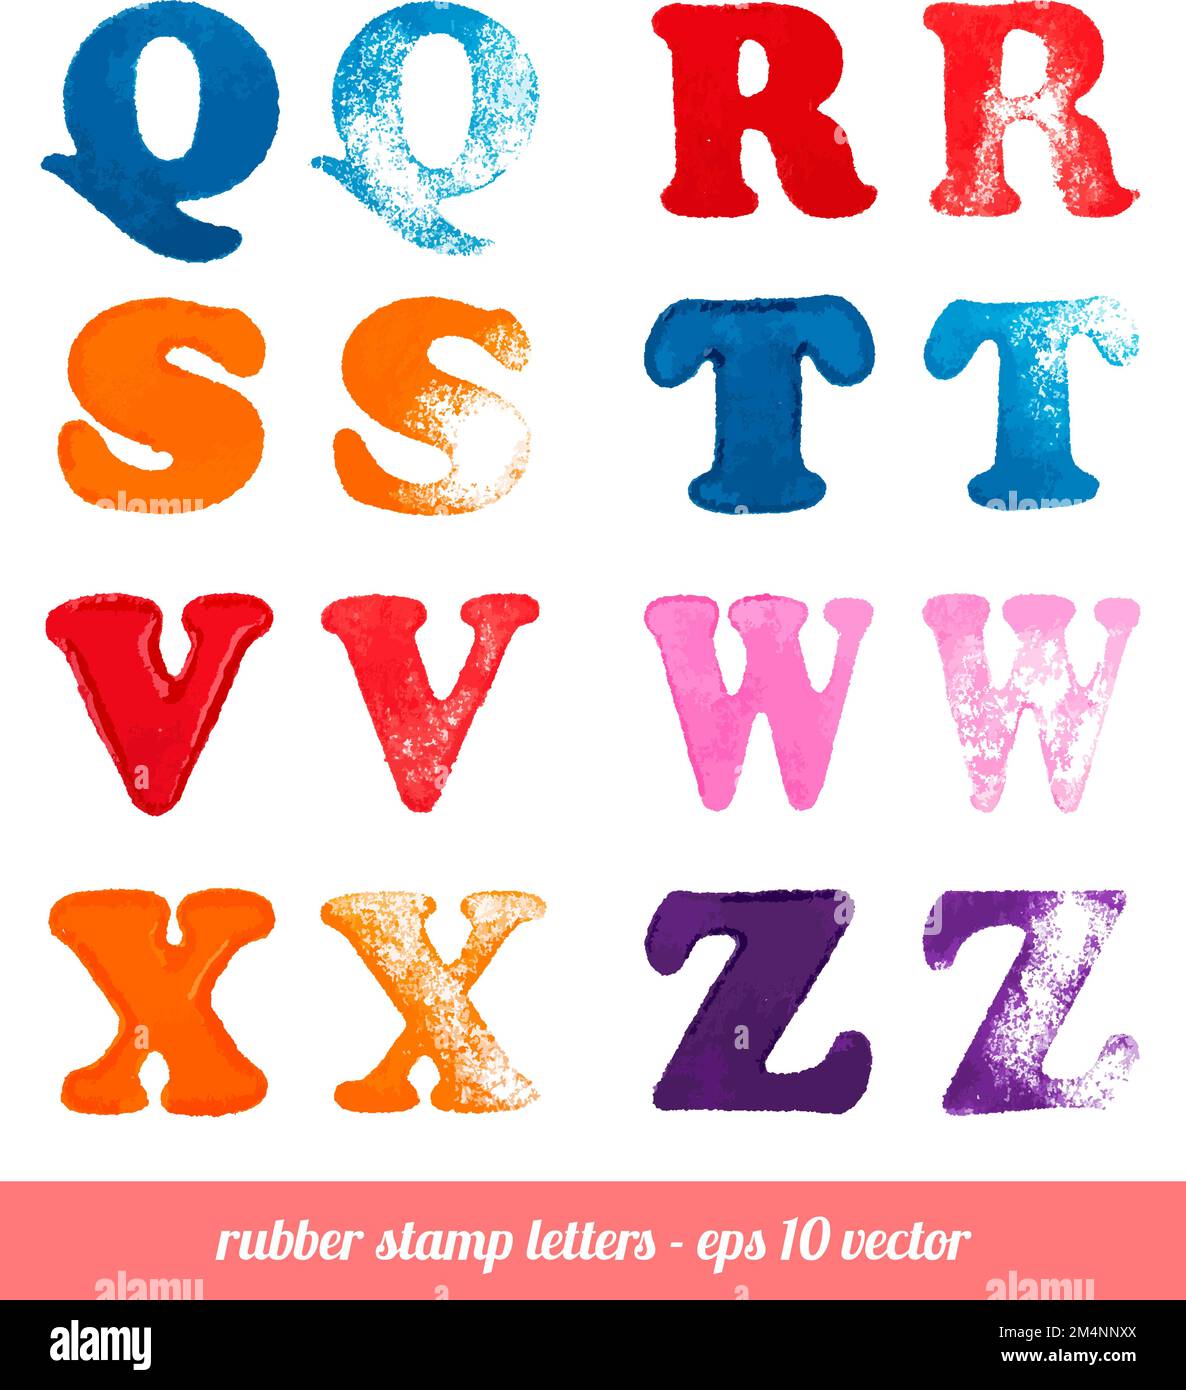 Isolated rubber stamp letters set. Stock Vector